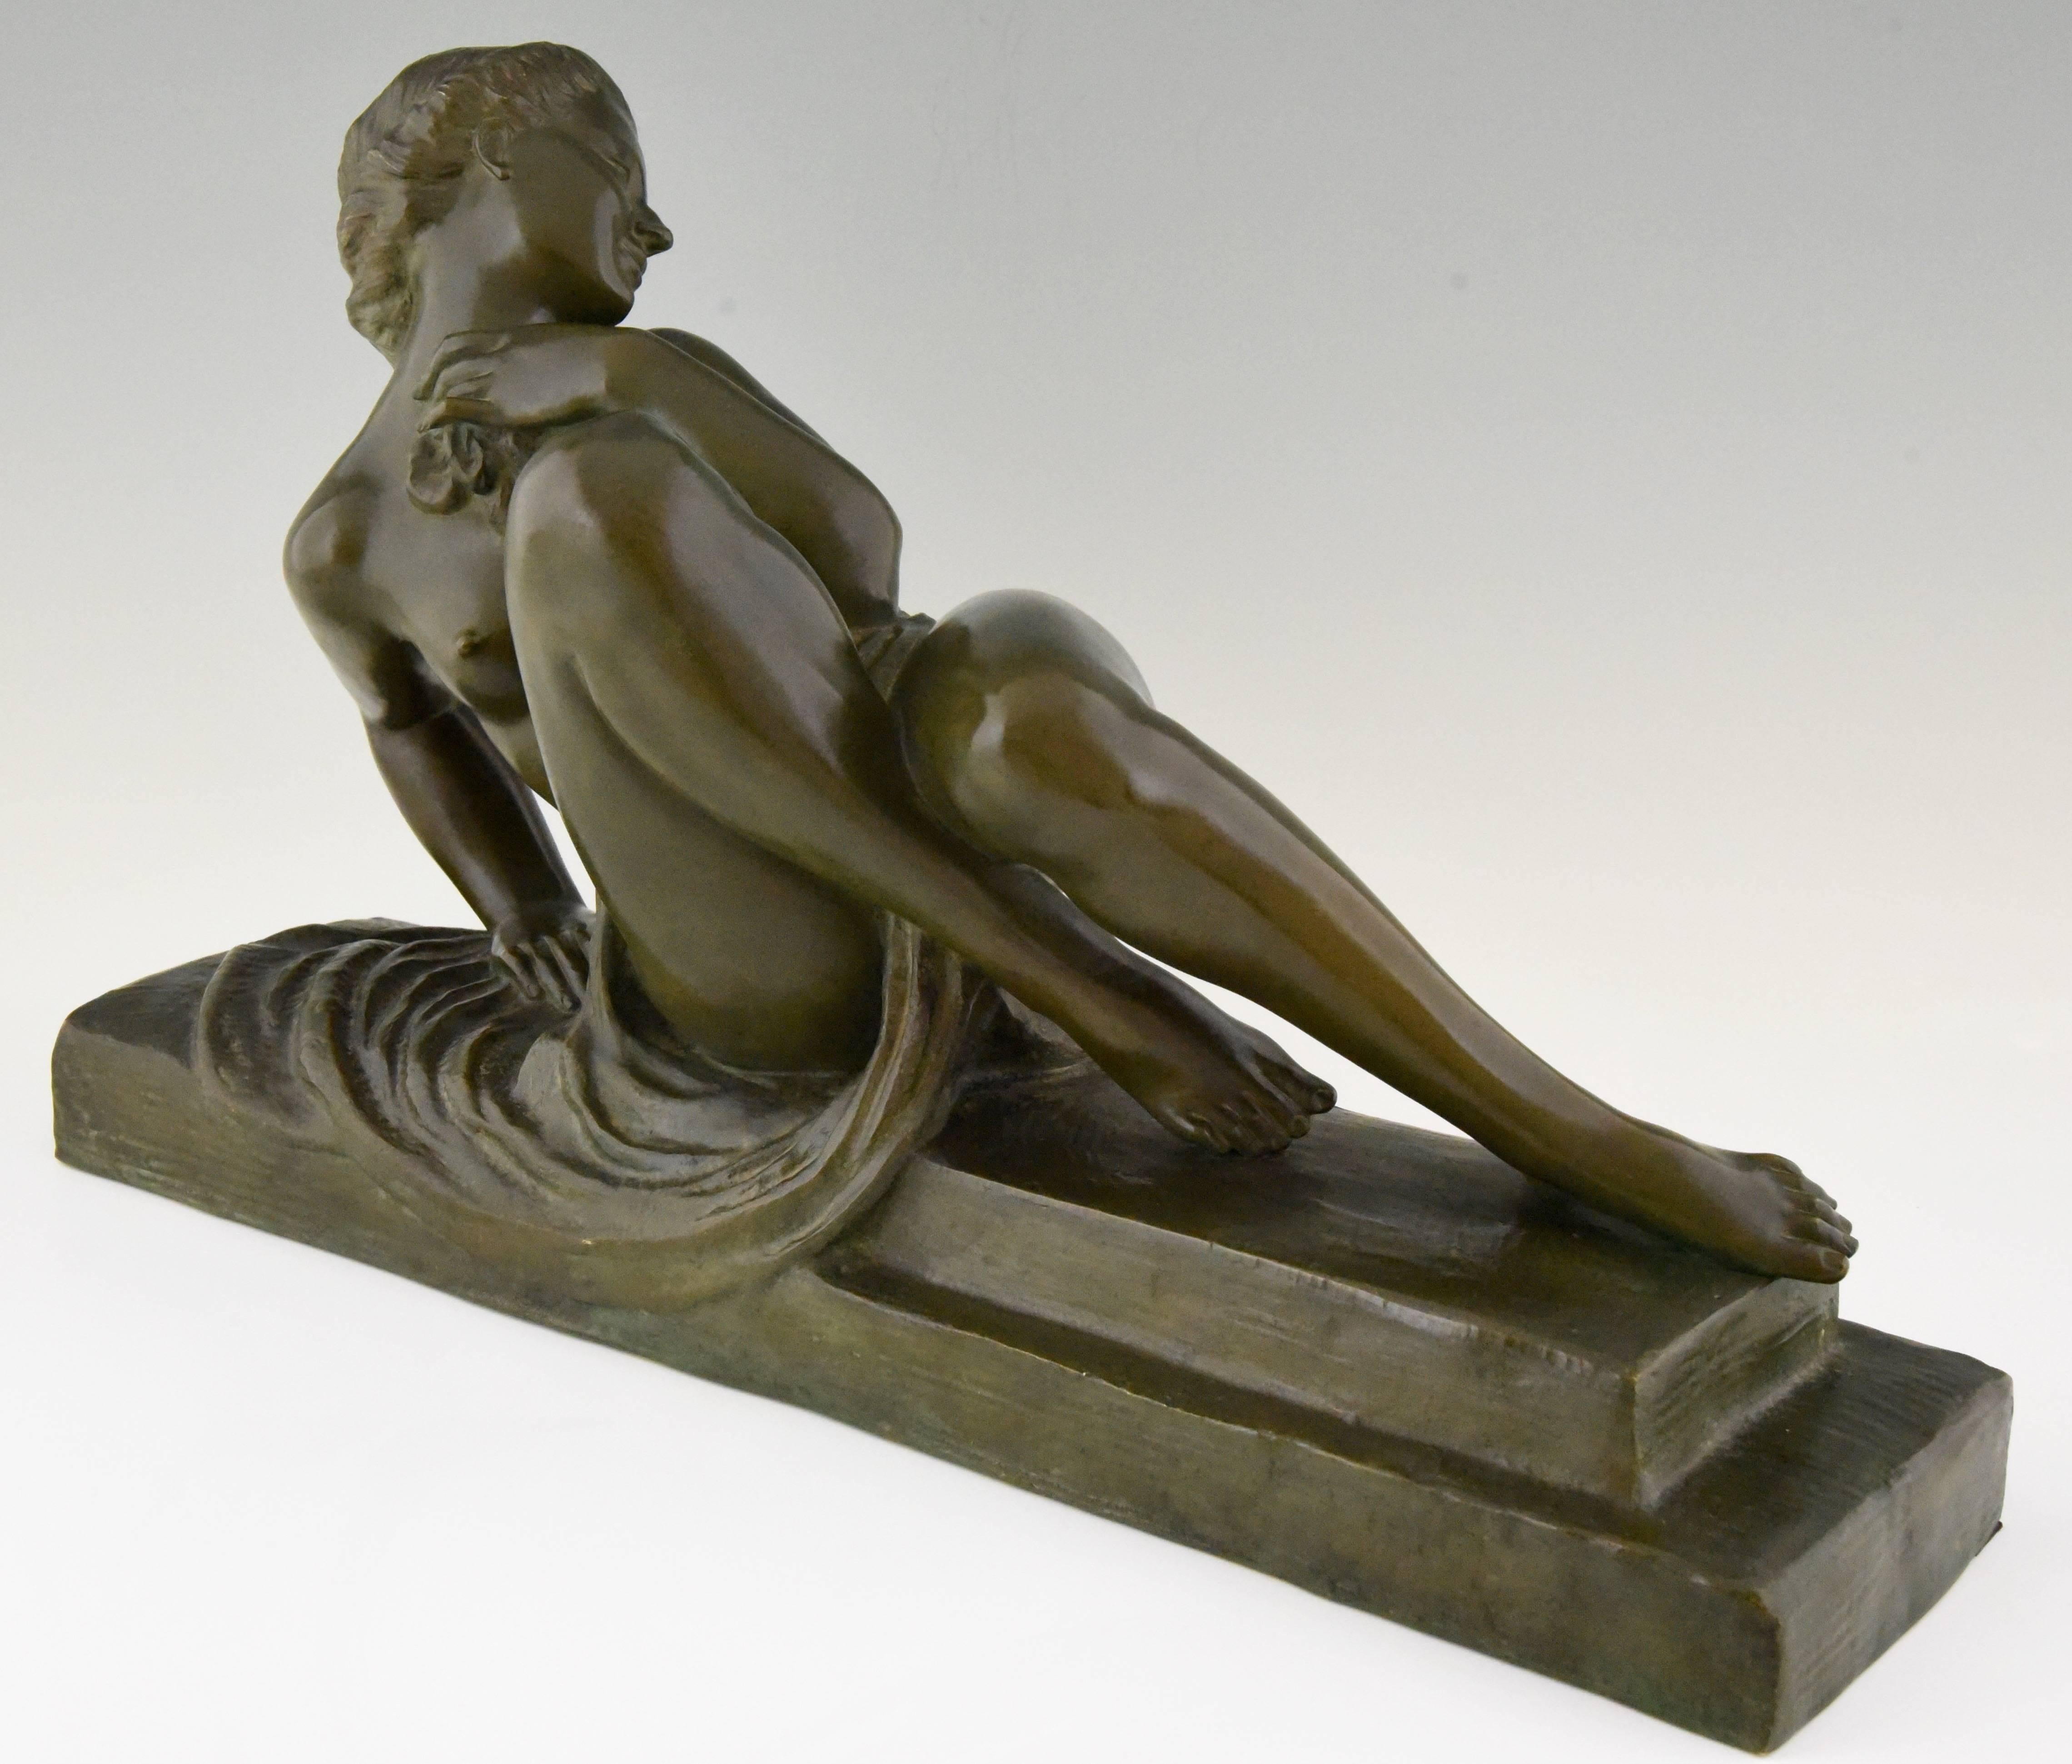 Patinated Art Deco Bronze Sculpture of a Nude with Drape Marcel Bouraine, 1930 France